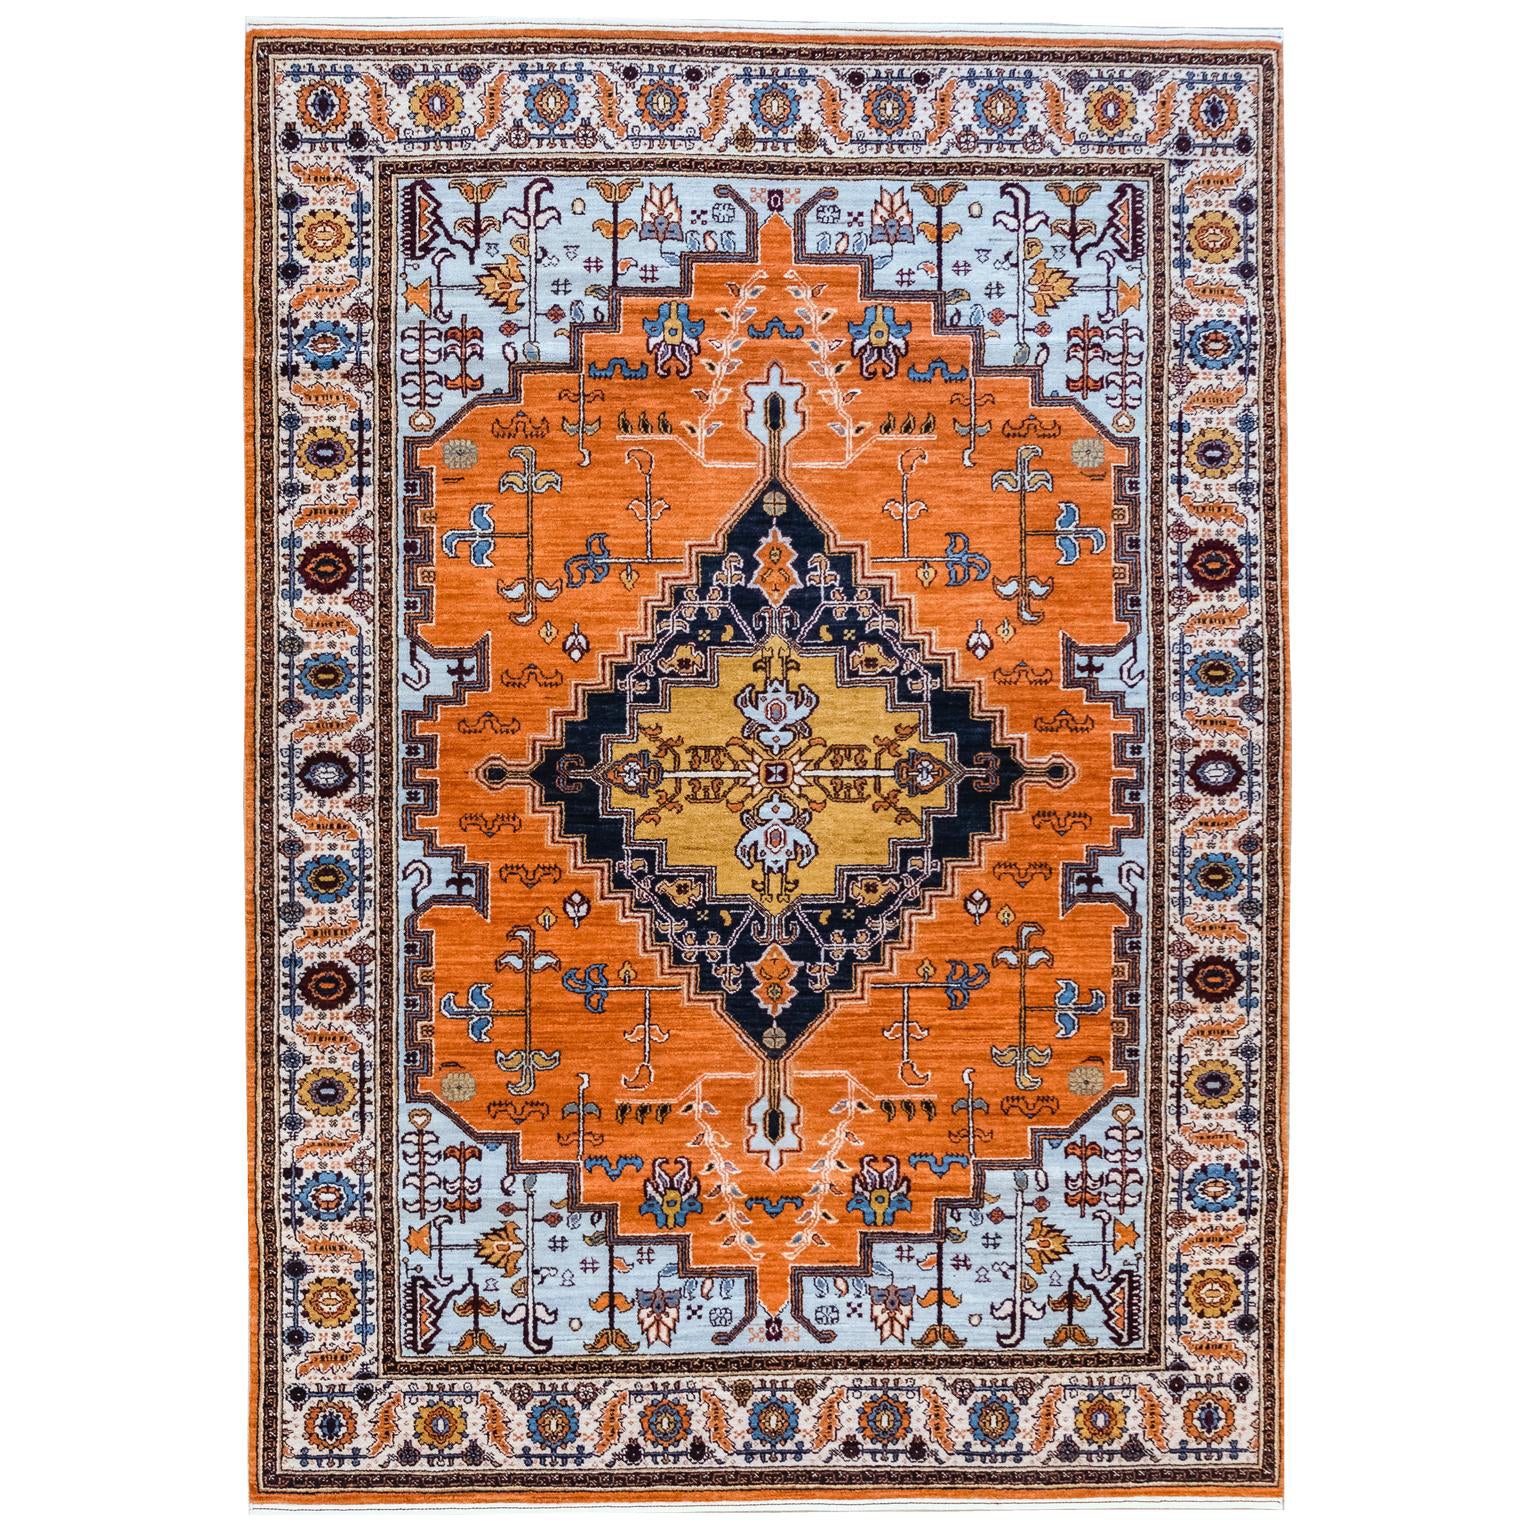 Transitional Orange, Blue, and Cream Persian Area Rug in Pure Wool, 5' x 7'